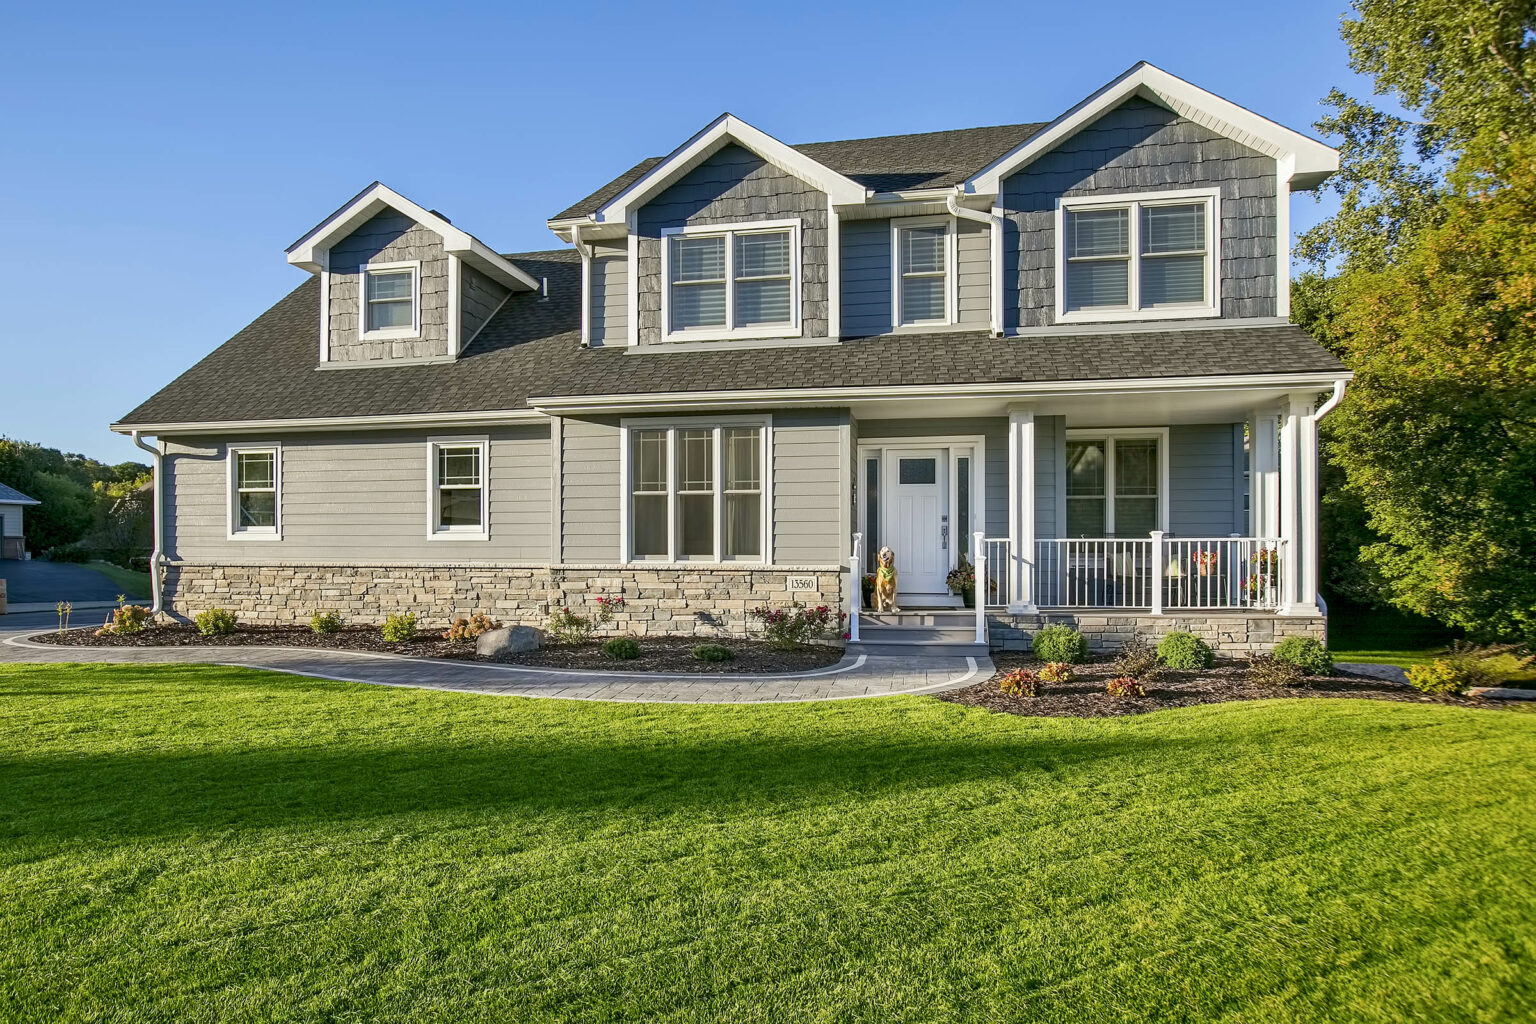 Minnesota home exterior with refreshed curb appeal and landscaping. Neutral tones.